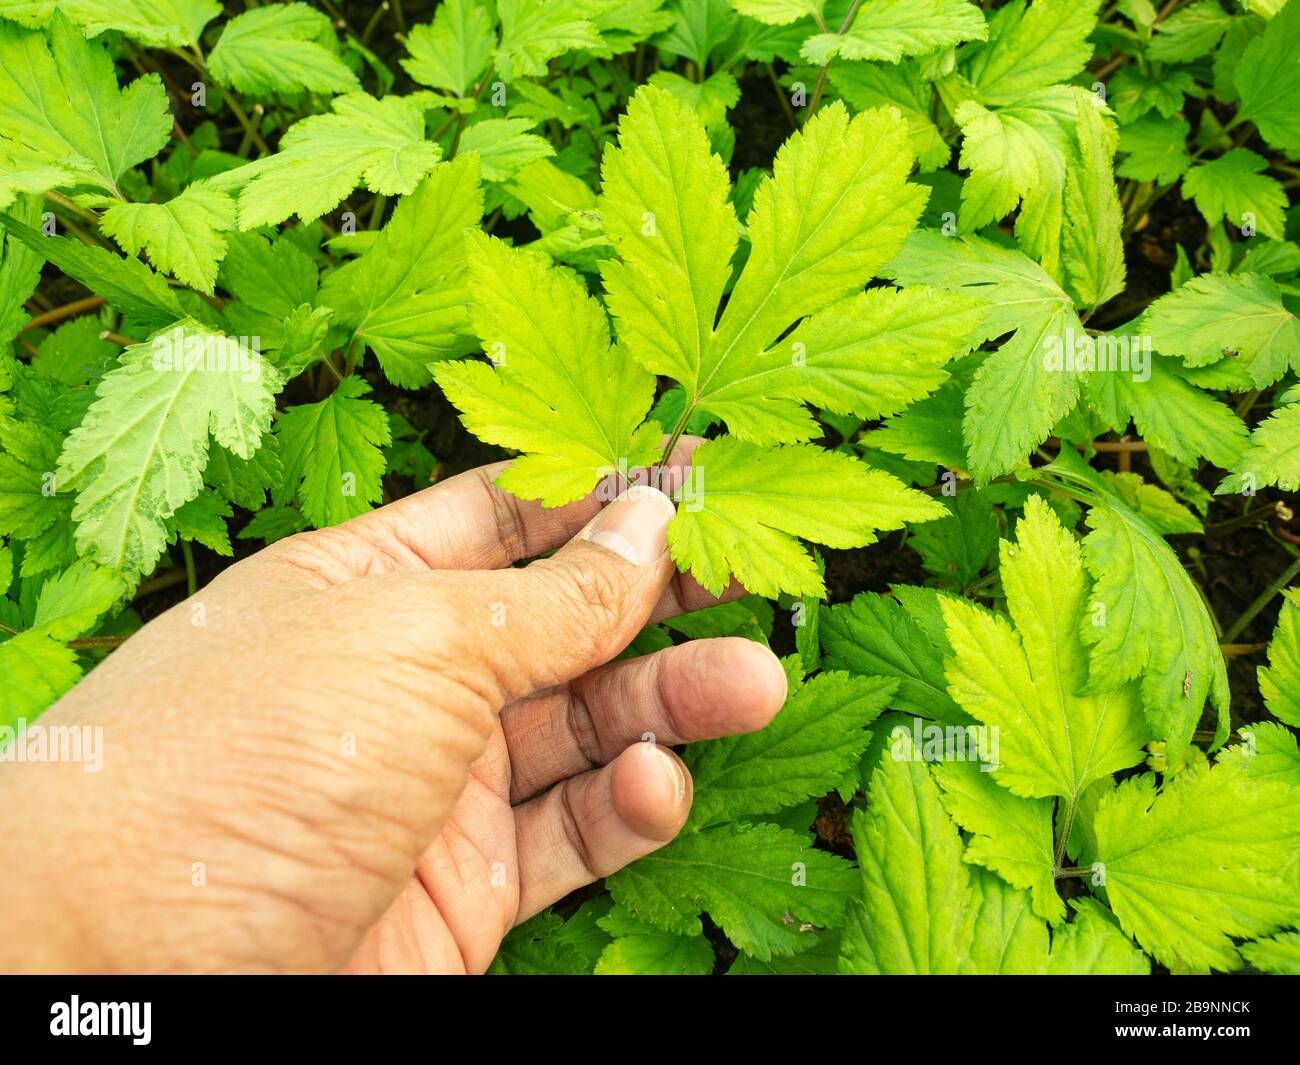 Gardeners collecting herbs called White Mugwort from plantation plots to check quality. The benefit of this herb is to help treat diabetes, detoxify, Stock Photo